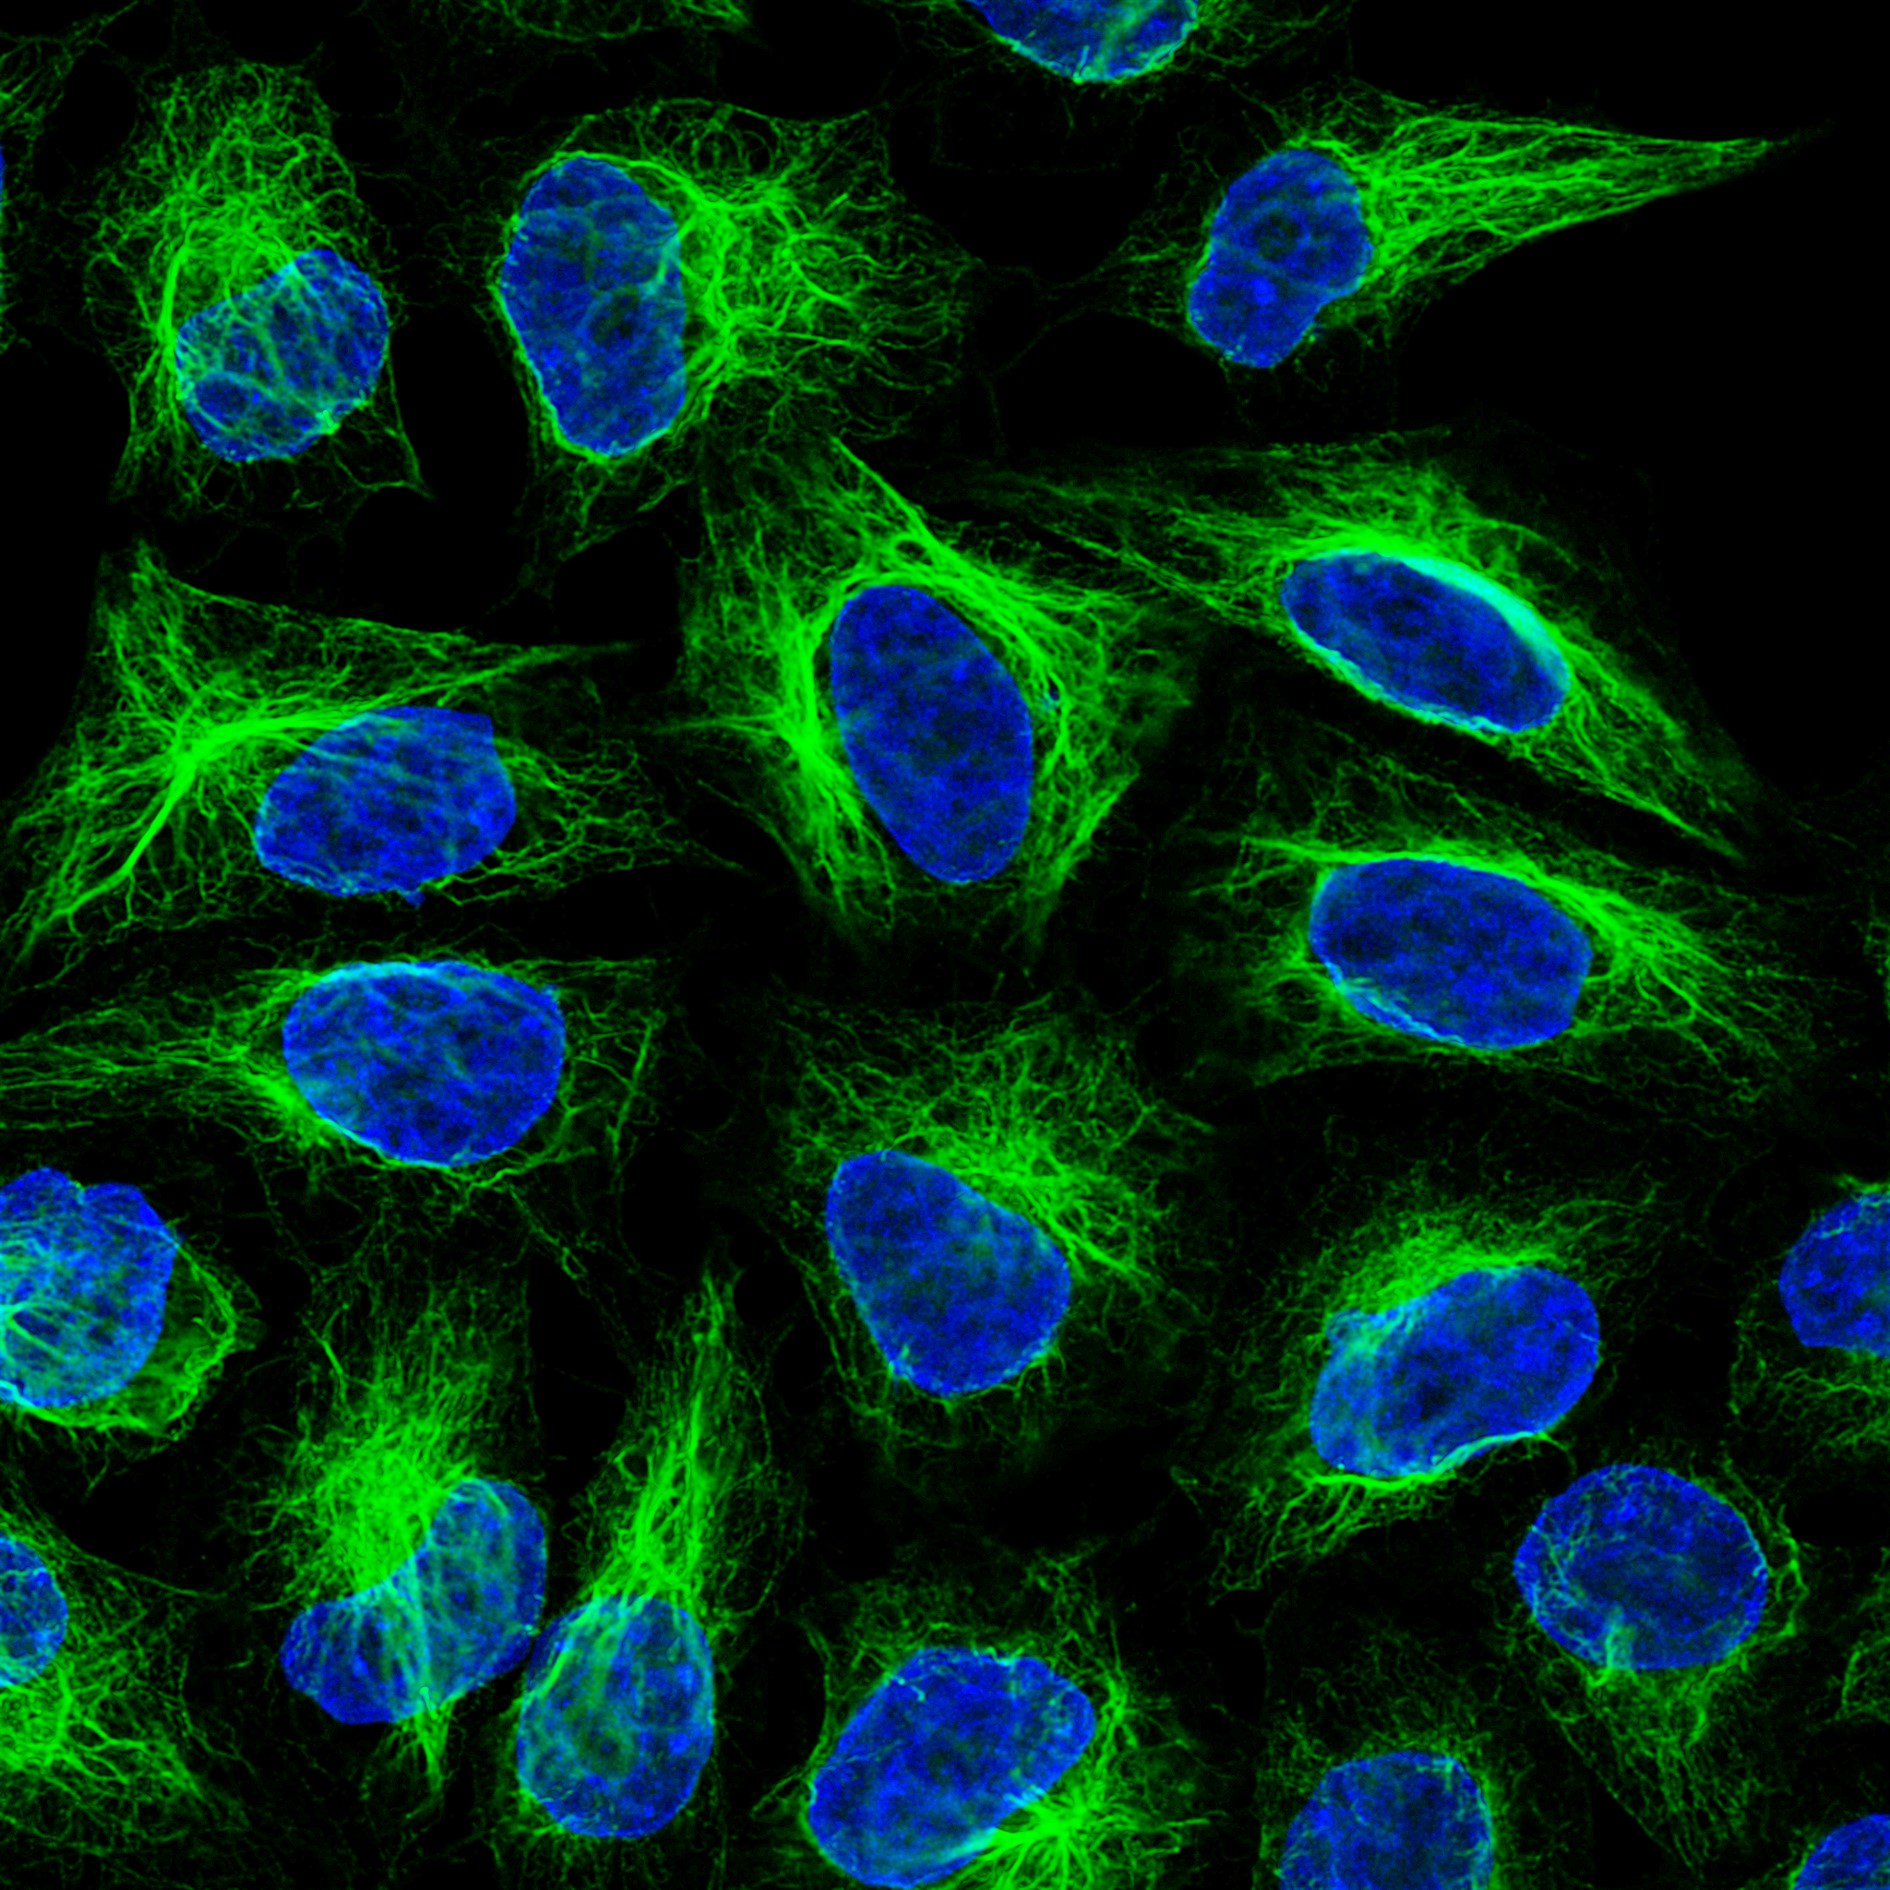 Immunofluorescence analysis of HeLa cells stained with mouse IgG1 anti-vimentin antibody and Nano-Secondary® alpaca anti-mouse IgG1, recombinant VHH, CoraLite® Plus 488 (smsG1CL488-1, green). Nuclei were stained with DAPI (blue). Images were recorded at the Core Facility Bioimaging at the Biomedical Center, LMU Munich.